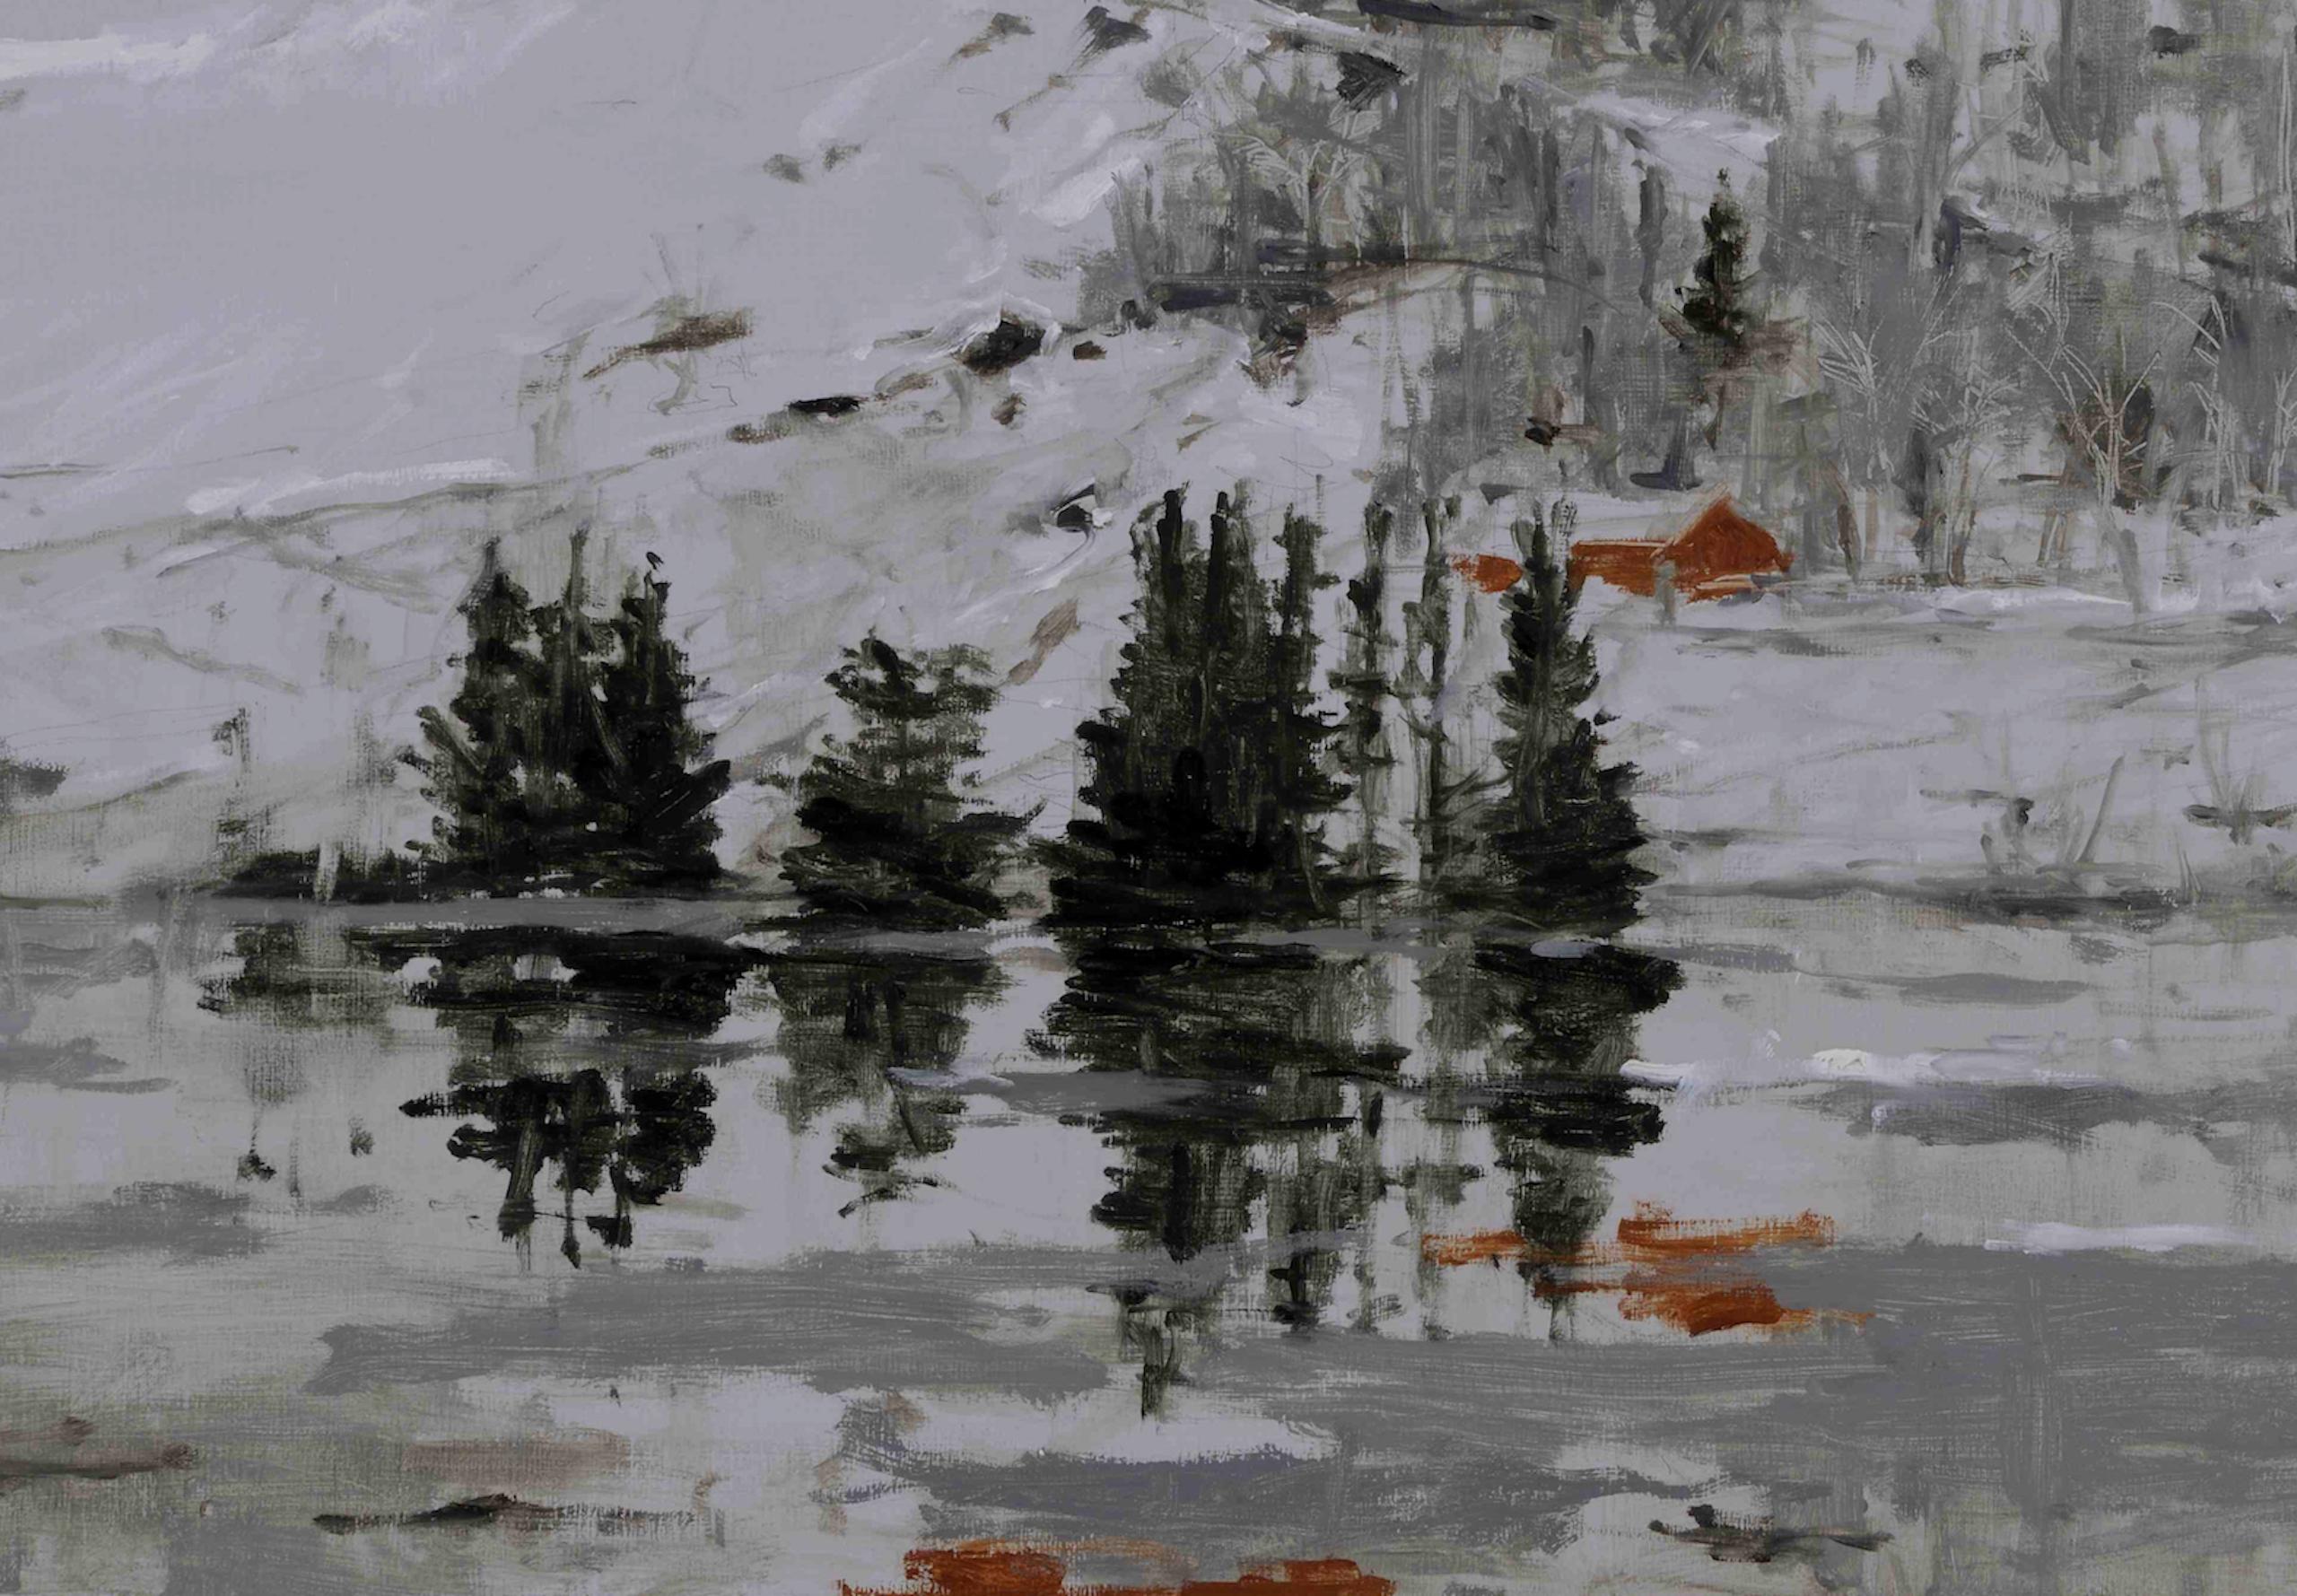 Narvik No. 2 by Calo Carratalá - Landscape painting, snowy mountain, winter For Sale 3